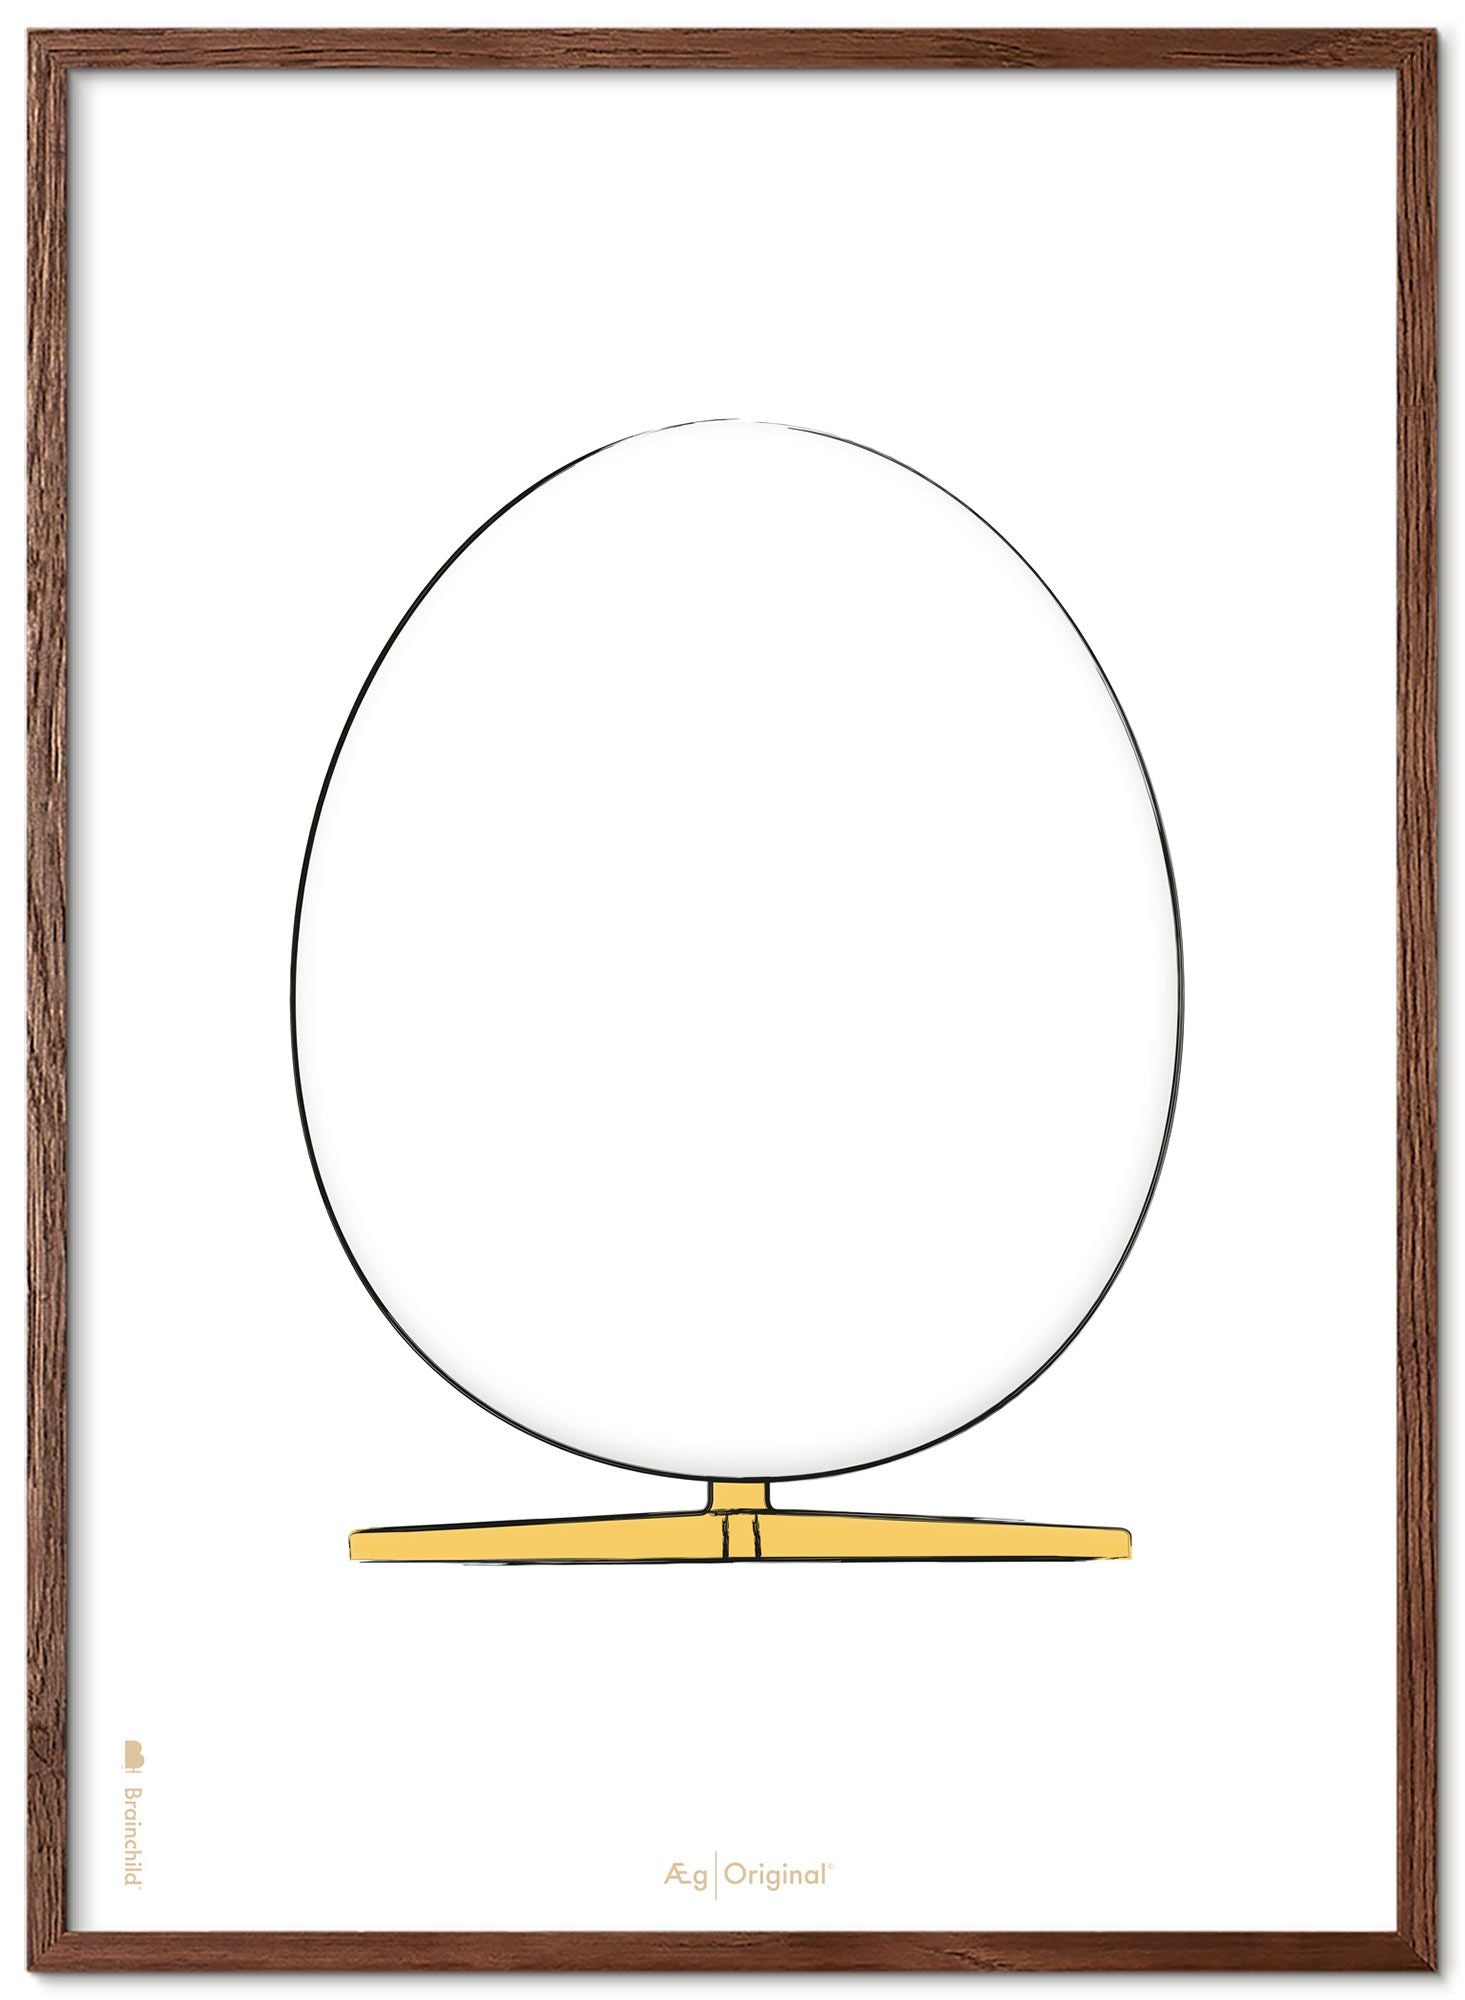 Brainchild The Egg Design Sketch Poster With Frame Made Of Dark Wood A5, White Background